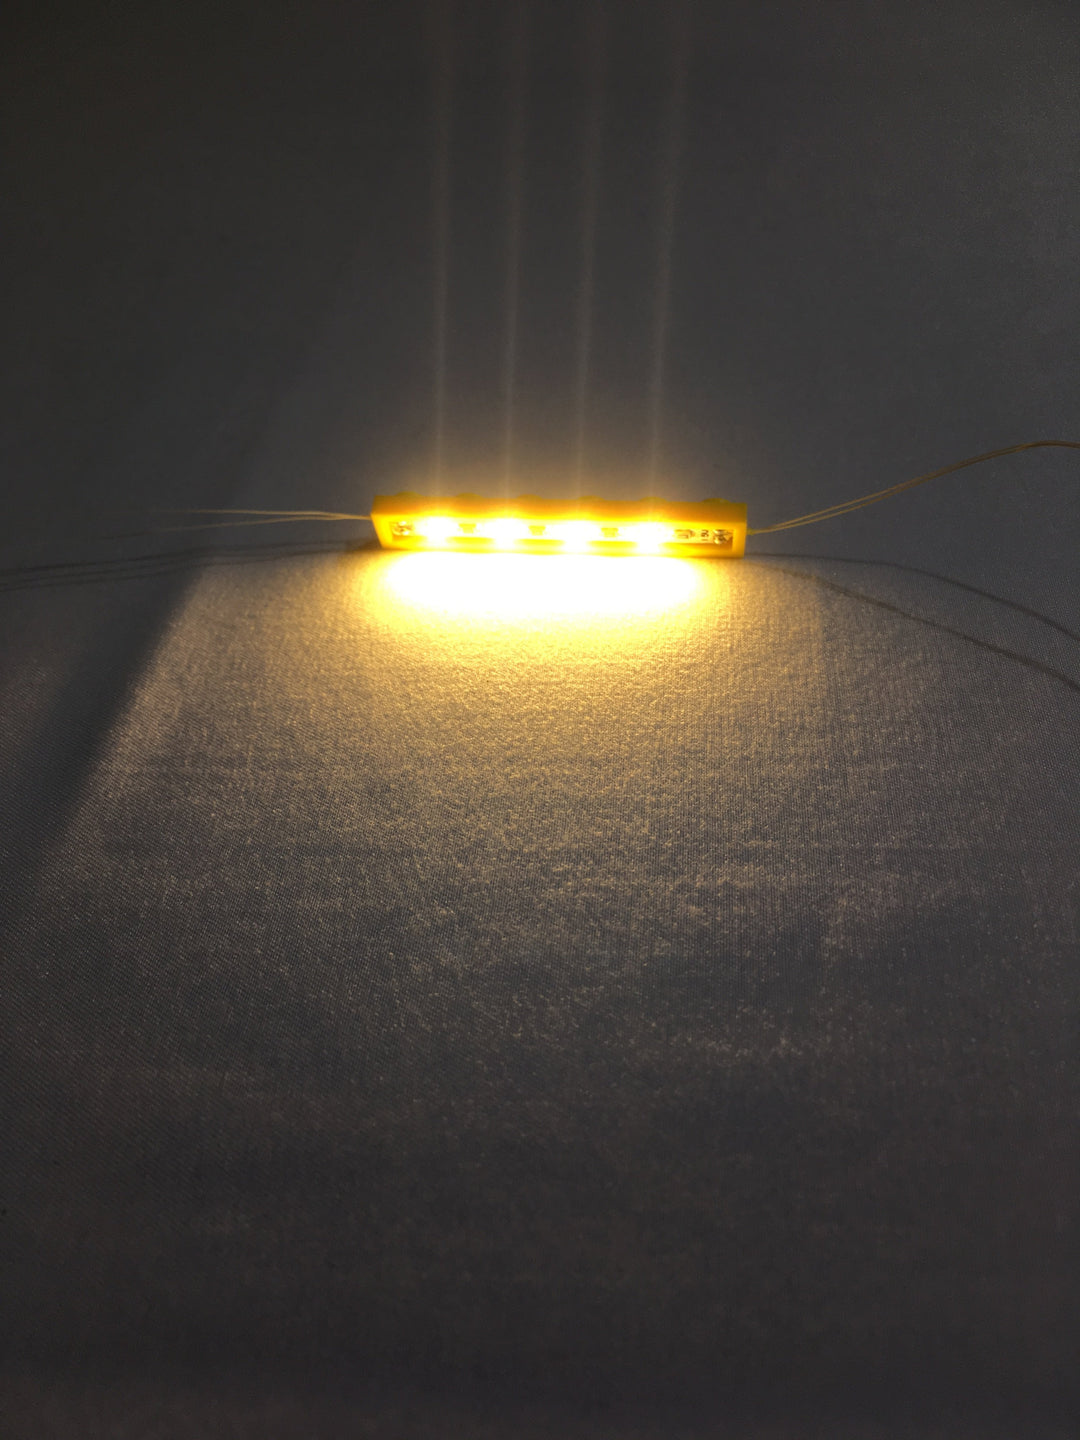 1x6-Yellow-Solid-Plate-LED-LIGHT-LINX-Create-Your-Own-LED-String-works-with-LEGO-bricks-by-Brick-Loot